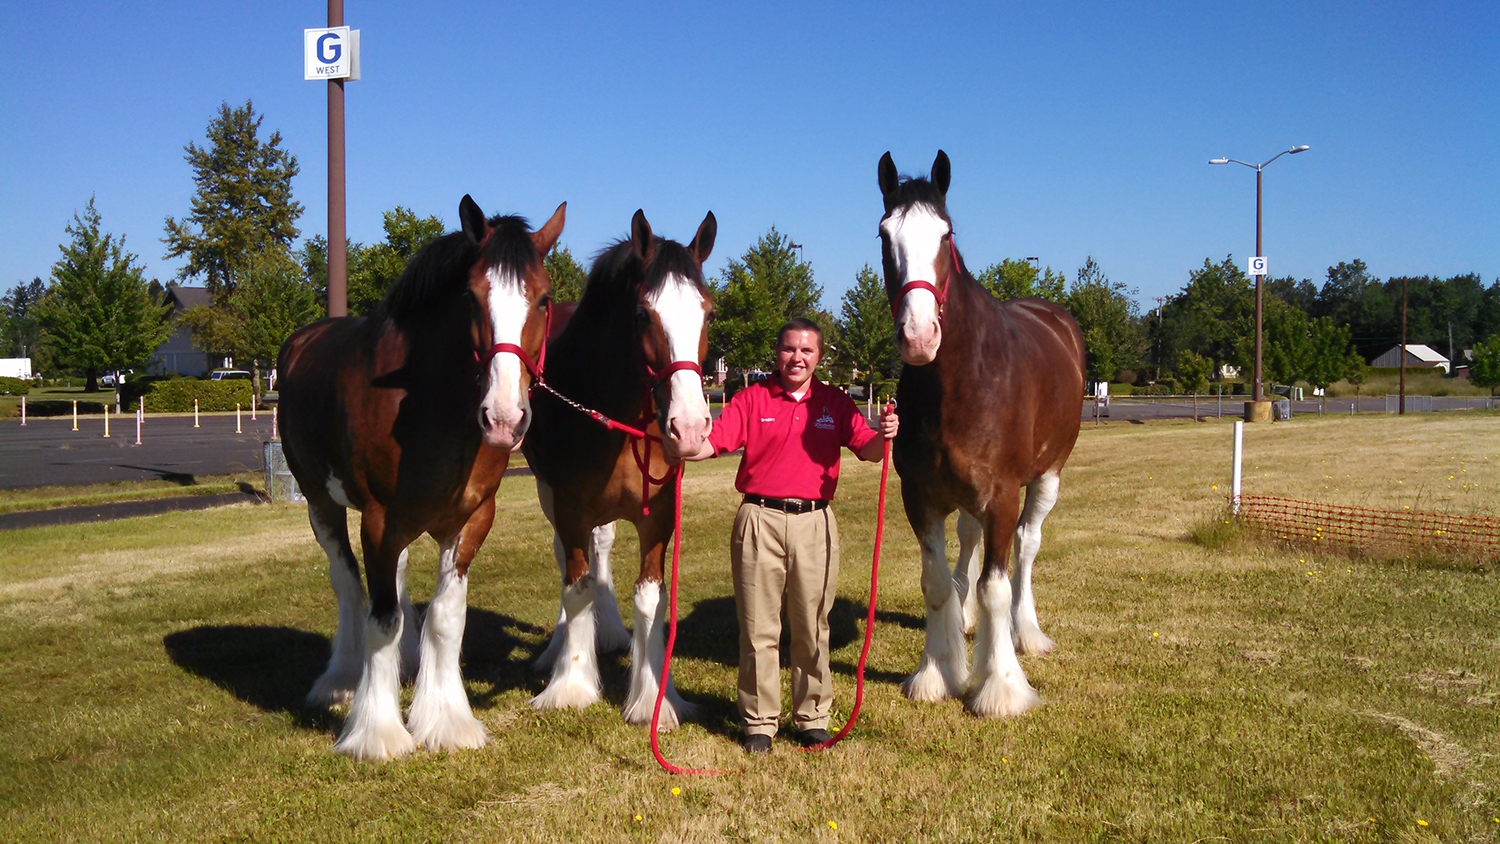 Brandon Glover with three Clydesdales